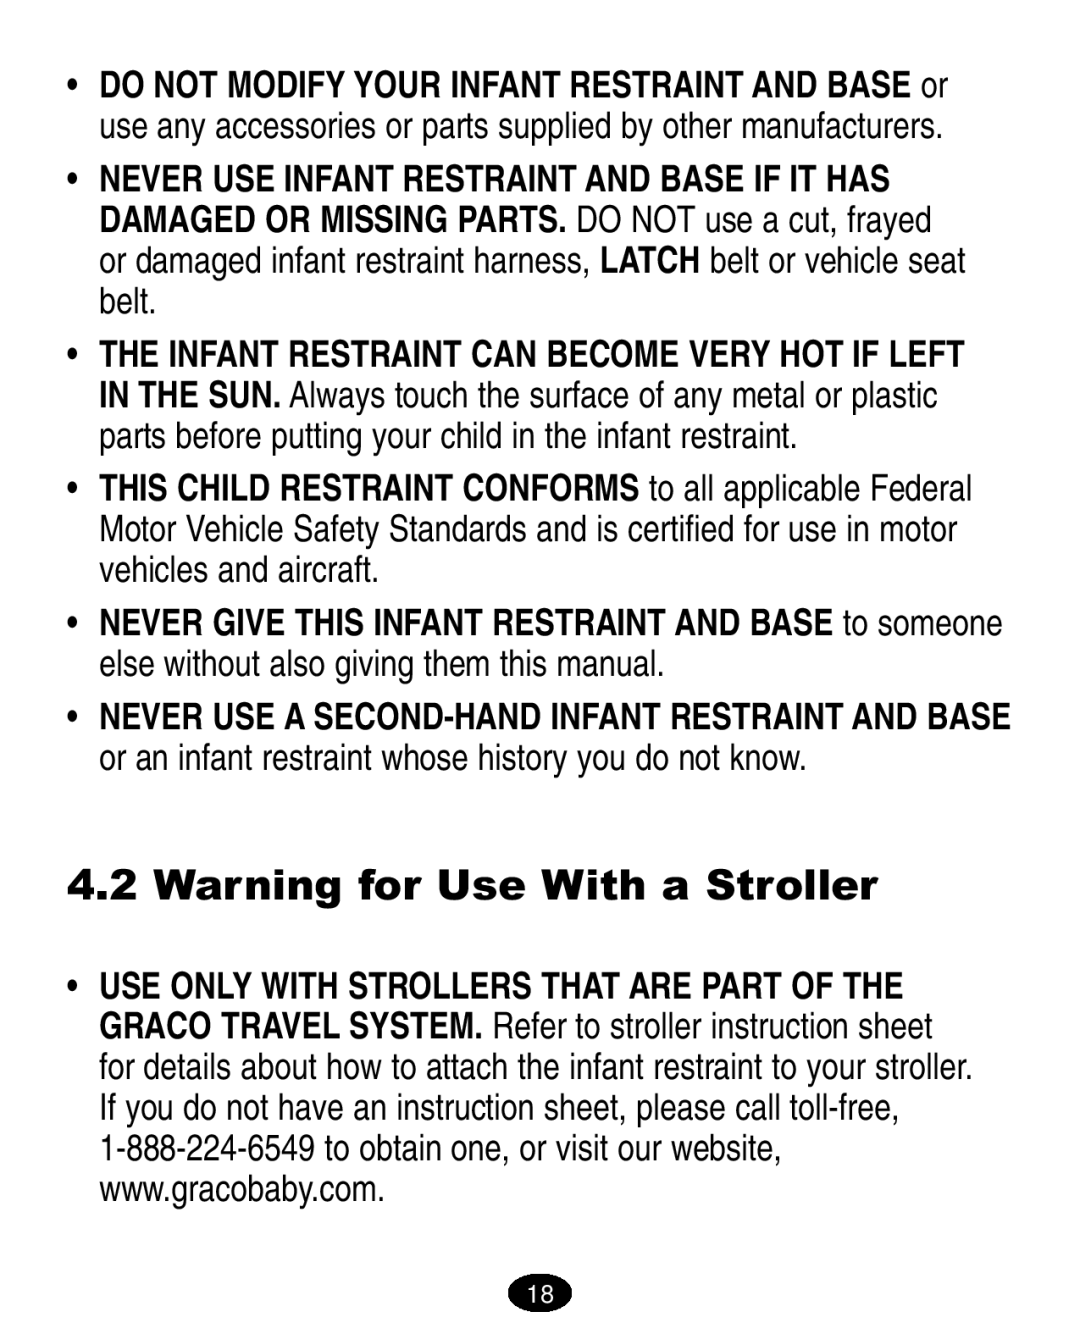 Graco ISPA005AA manual Warning for Use With a Stroller 